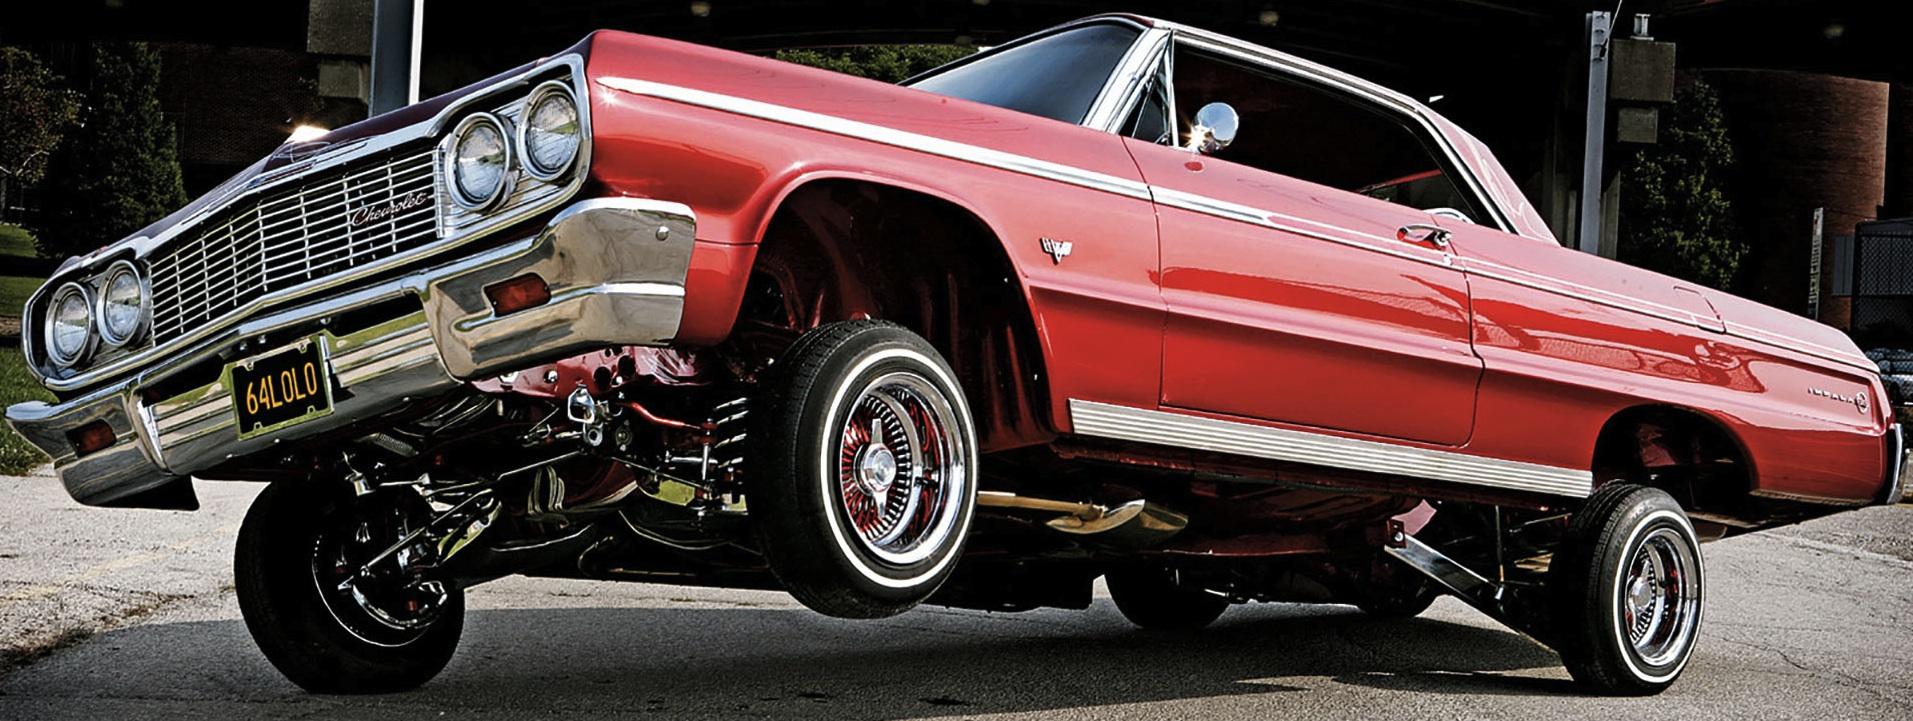 Animals For 1964 Chevy Impala Lowrider Wallpaper - Red 64 Impala Lowrider , HD Wallpaper & Backgrounds